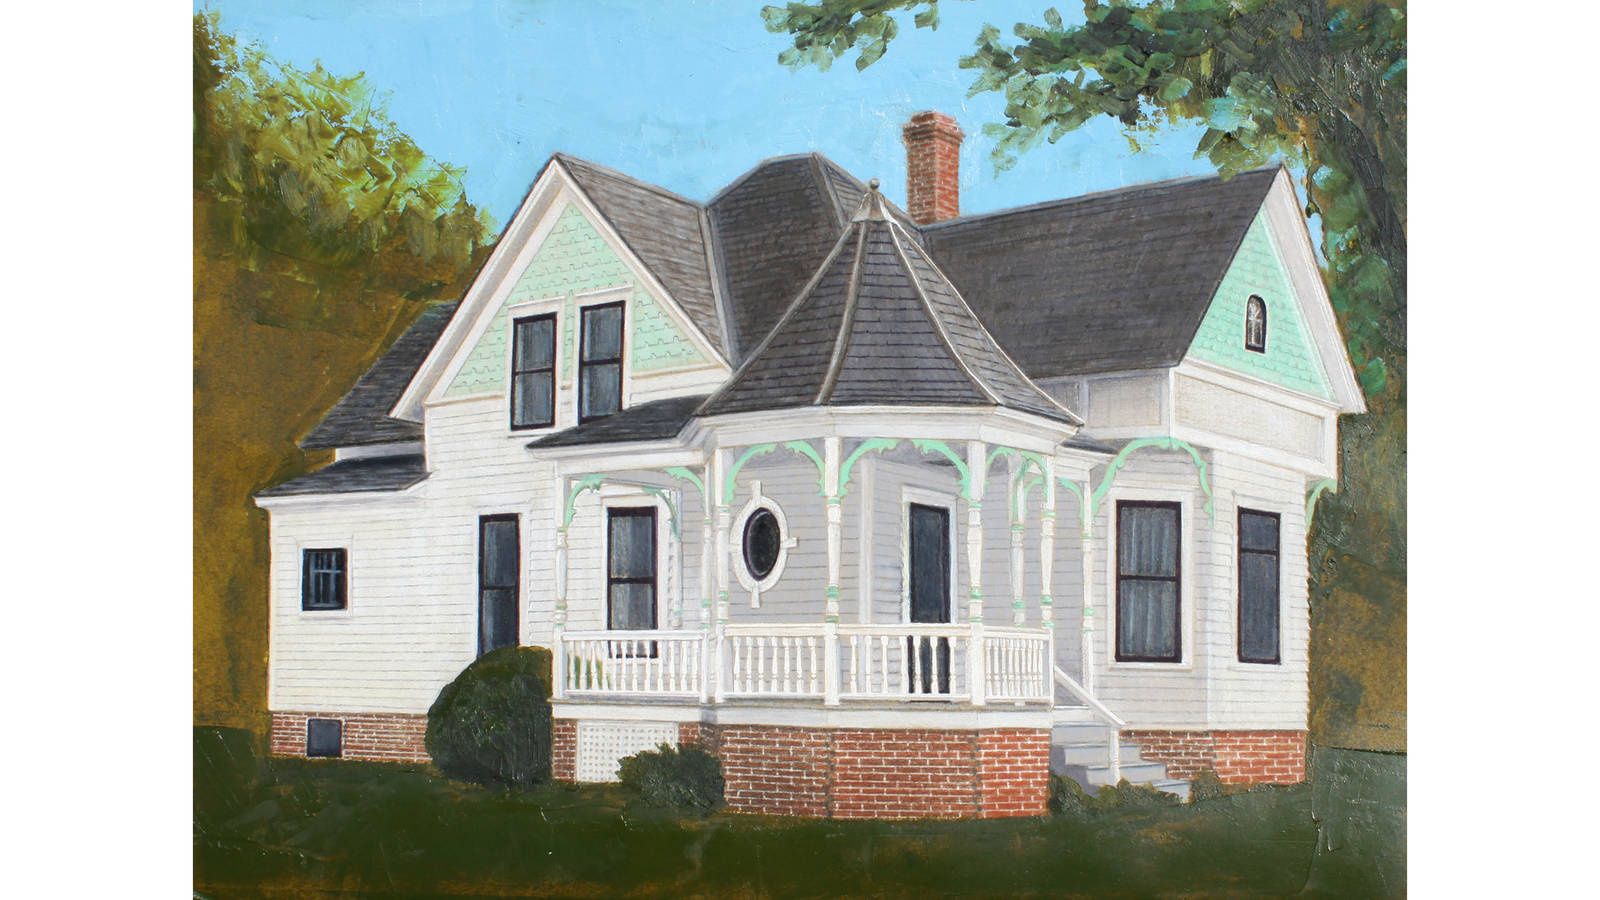 <h3 style="text-align: center; padding: 50px;"><span class="text-Intro-style">The C.E. Smith House at Herbert Hoover National Historic Site. Colored pencil and oil paint on paper, 2018.</span></h3>